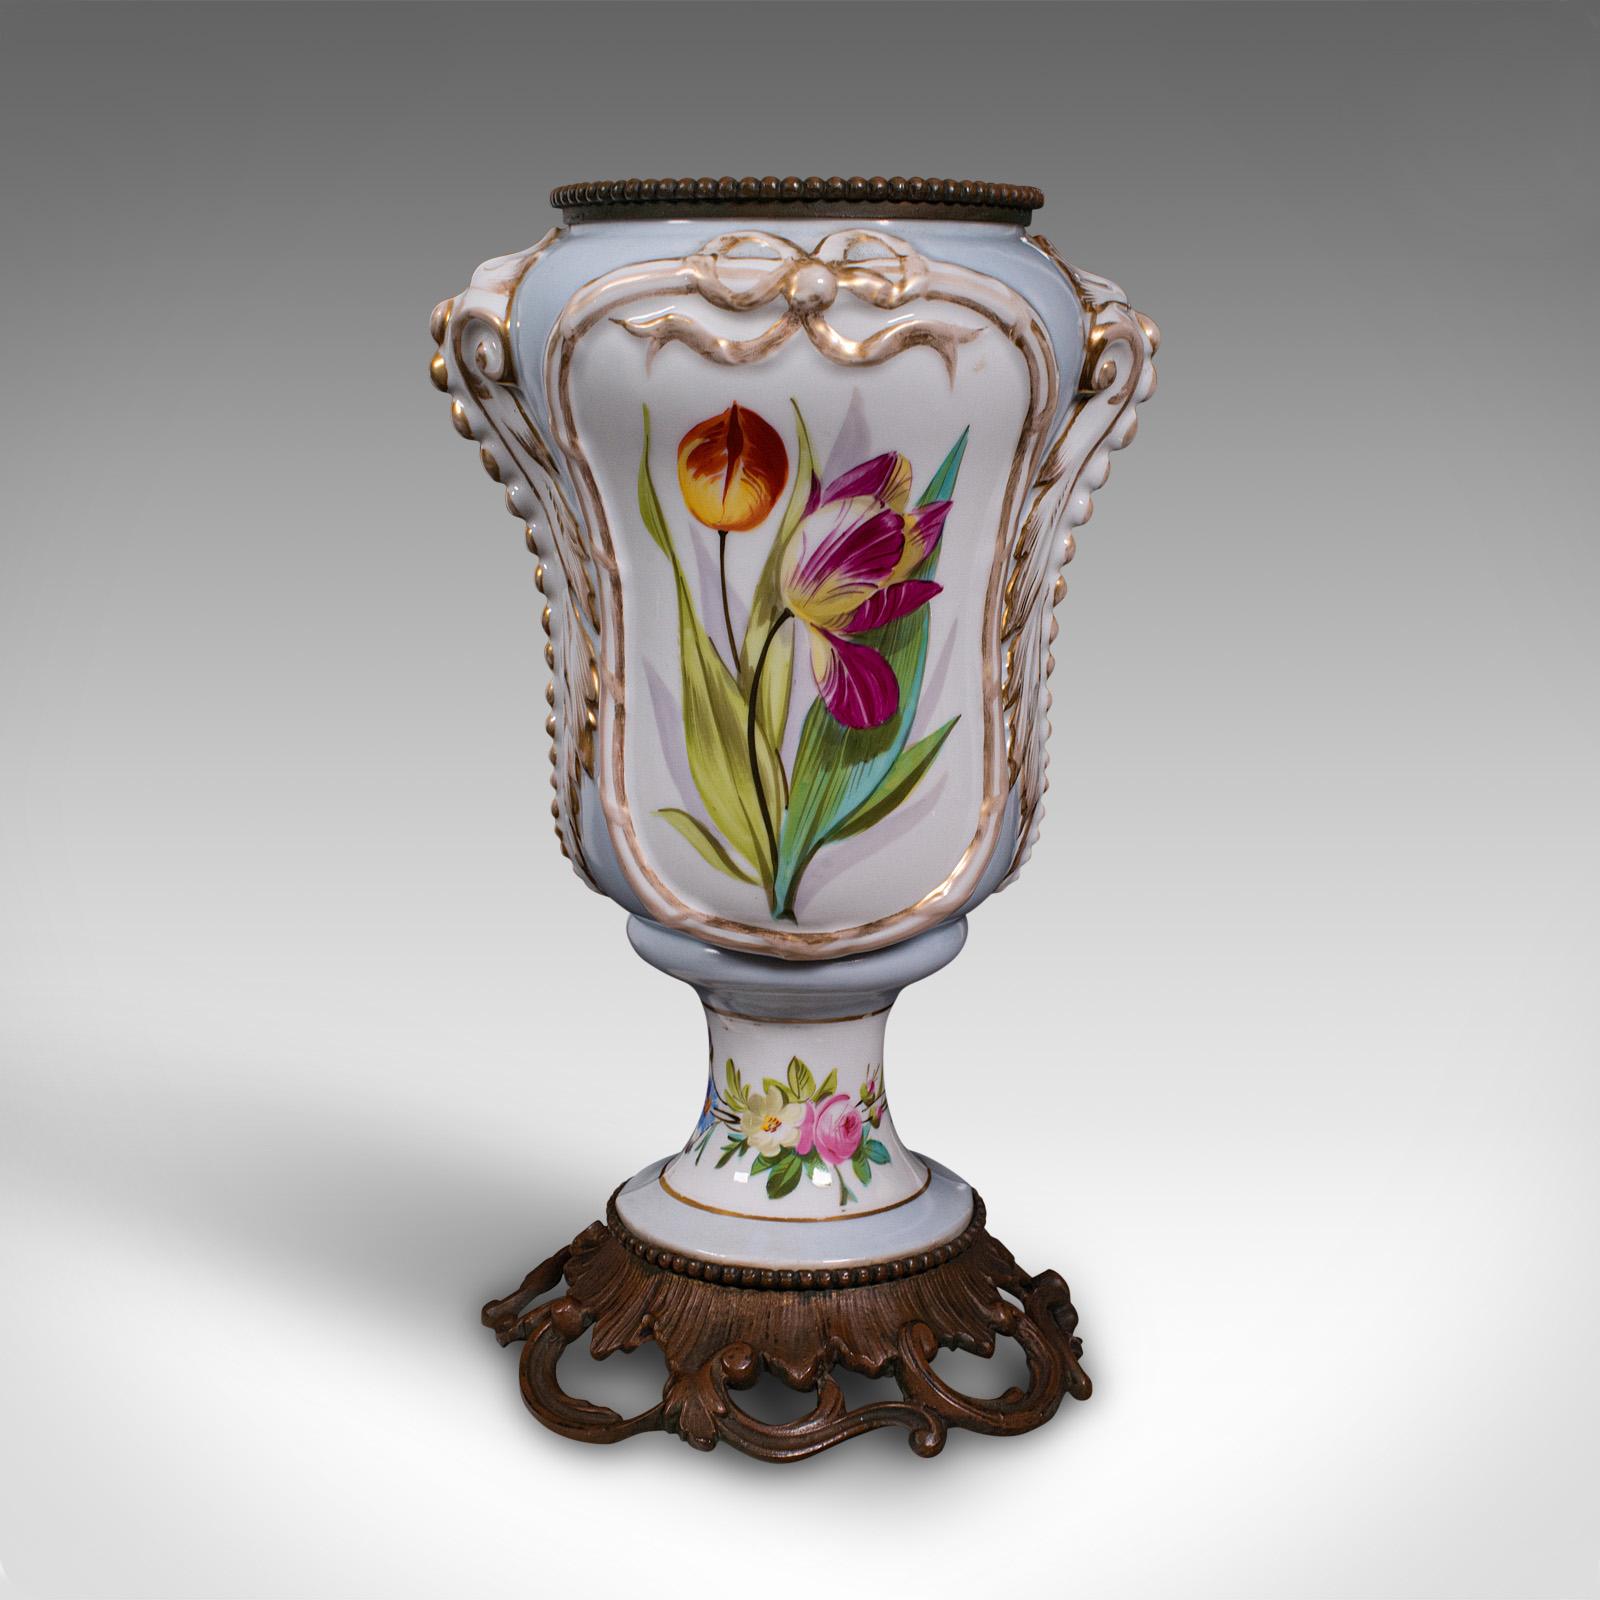 This is an antique mantlepiece vase. A French, ceramic and gilt metal display planter or jardiniere, dating to the late Victorian period, circa 1900.

Graceful of form, with attractive colour and decorations
Displays a desirable aged patina and in